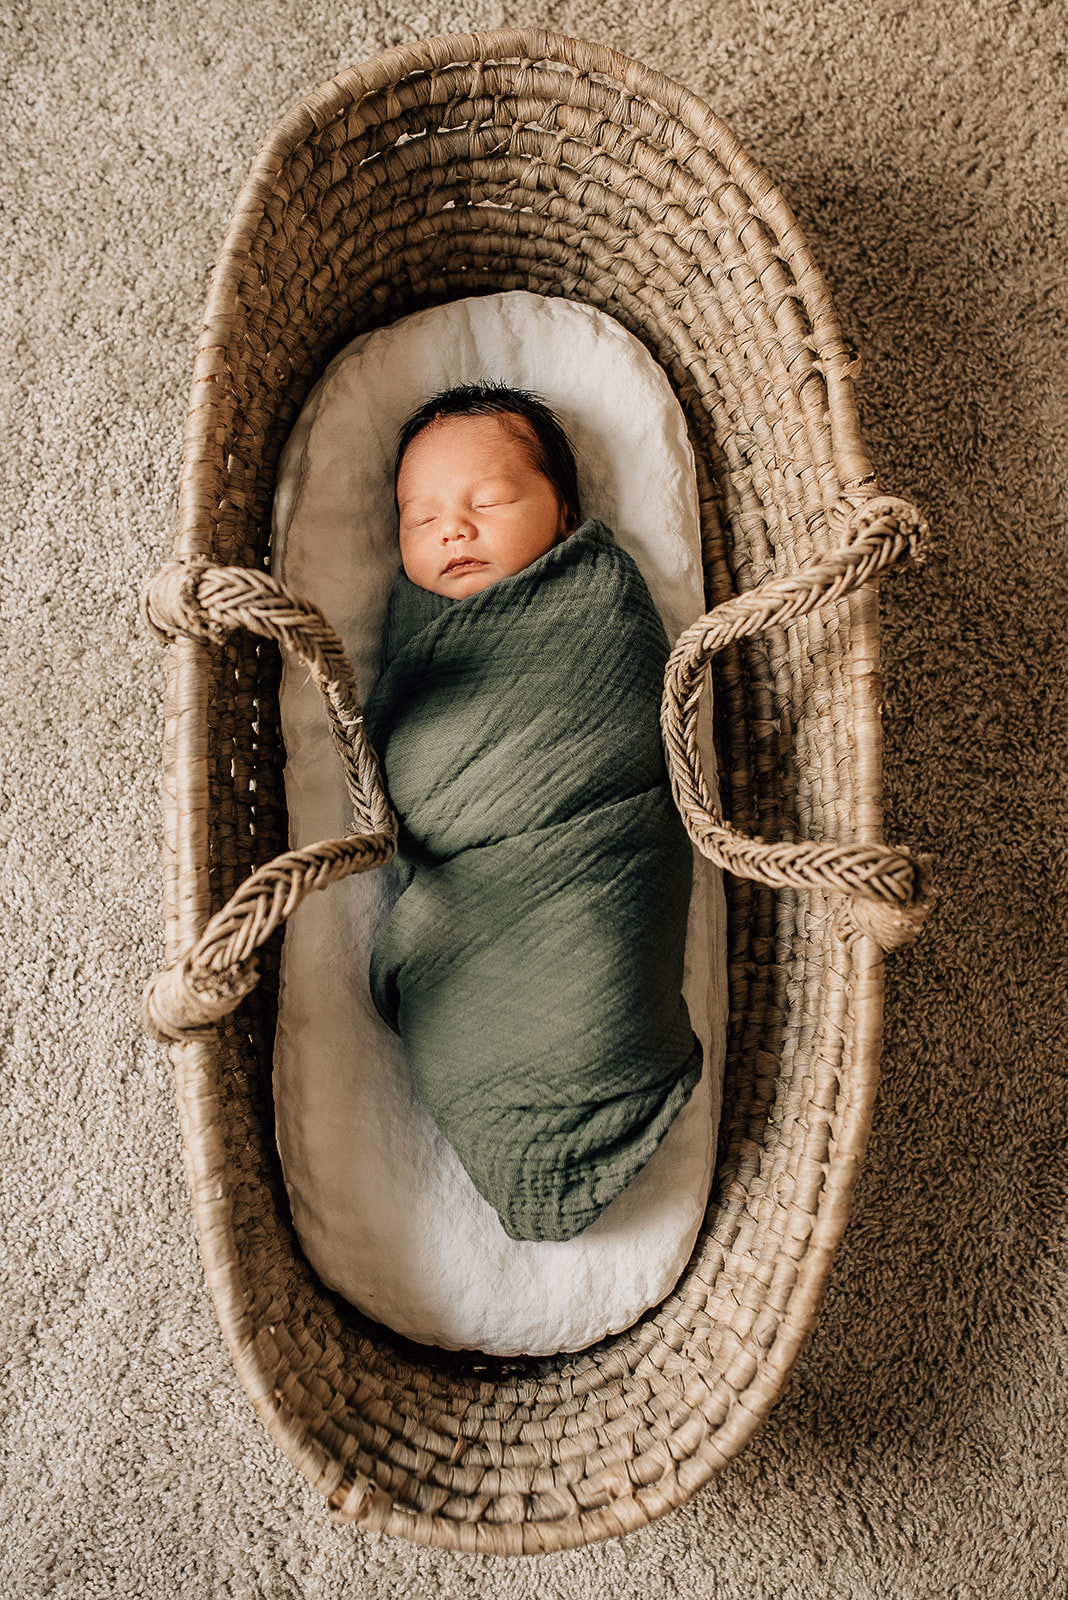 A newborn baby sleeps in a long woven basket in a green swaddle on a carpet floor Sanna Baby